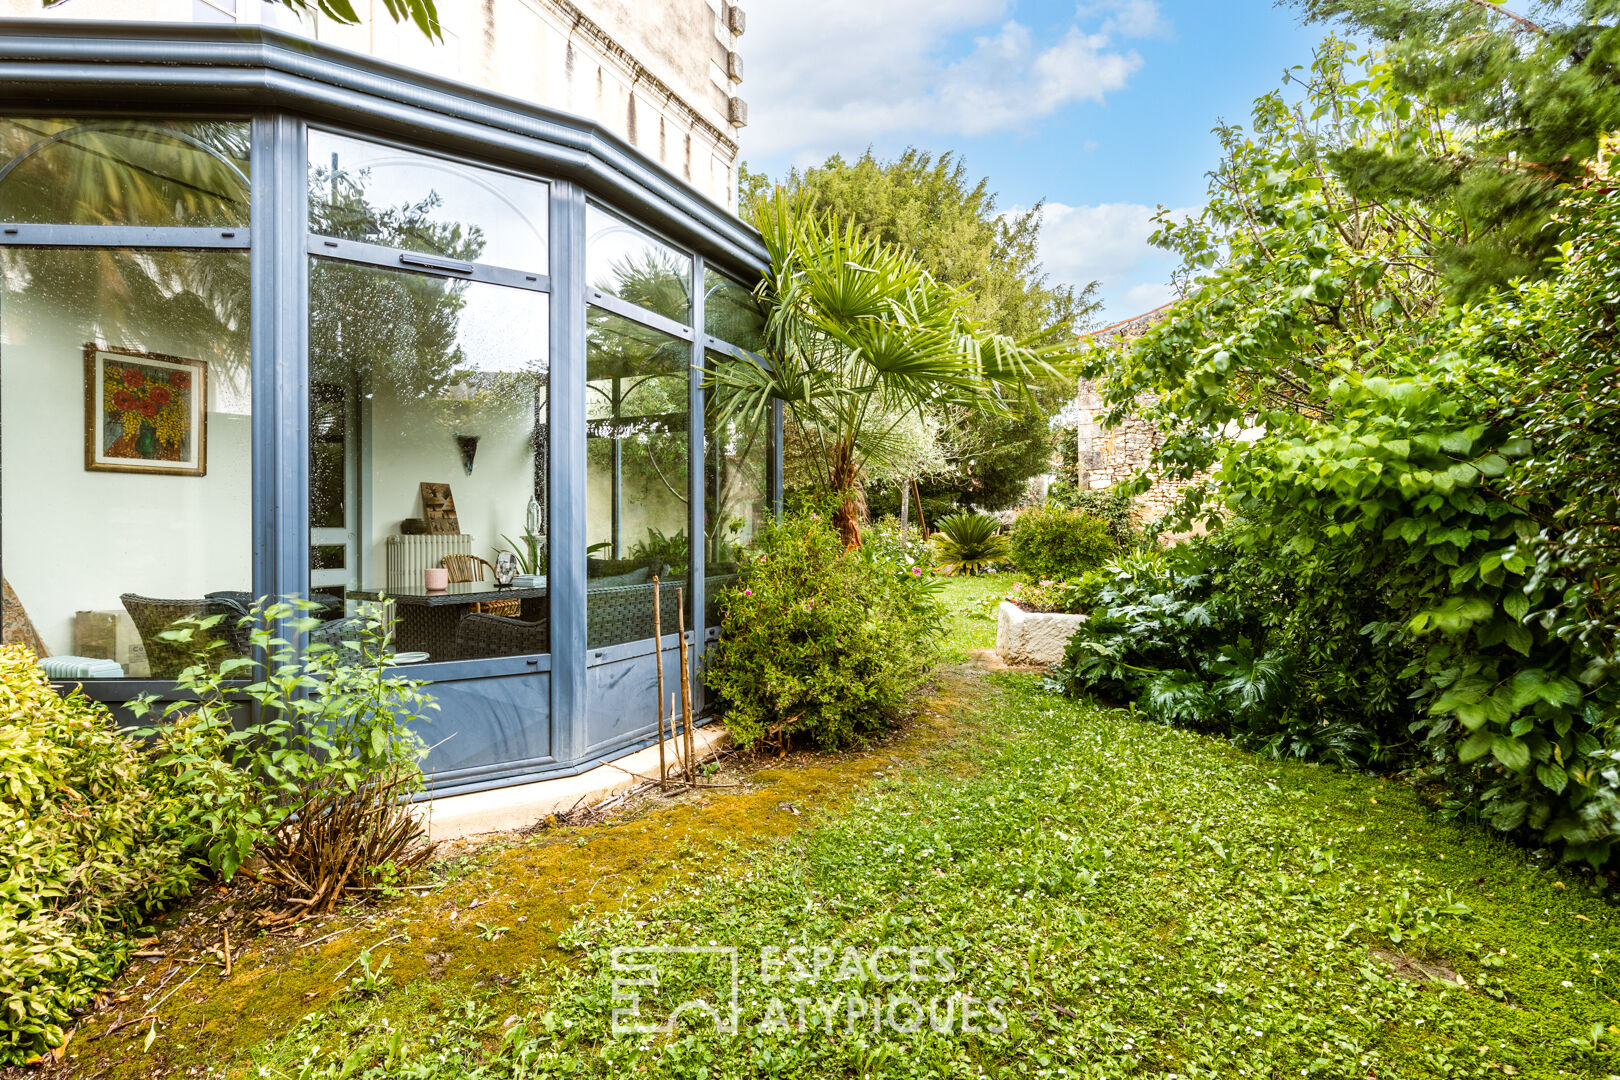 Bourgeois residence in the heart of the city and its bucolic garden